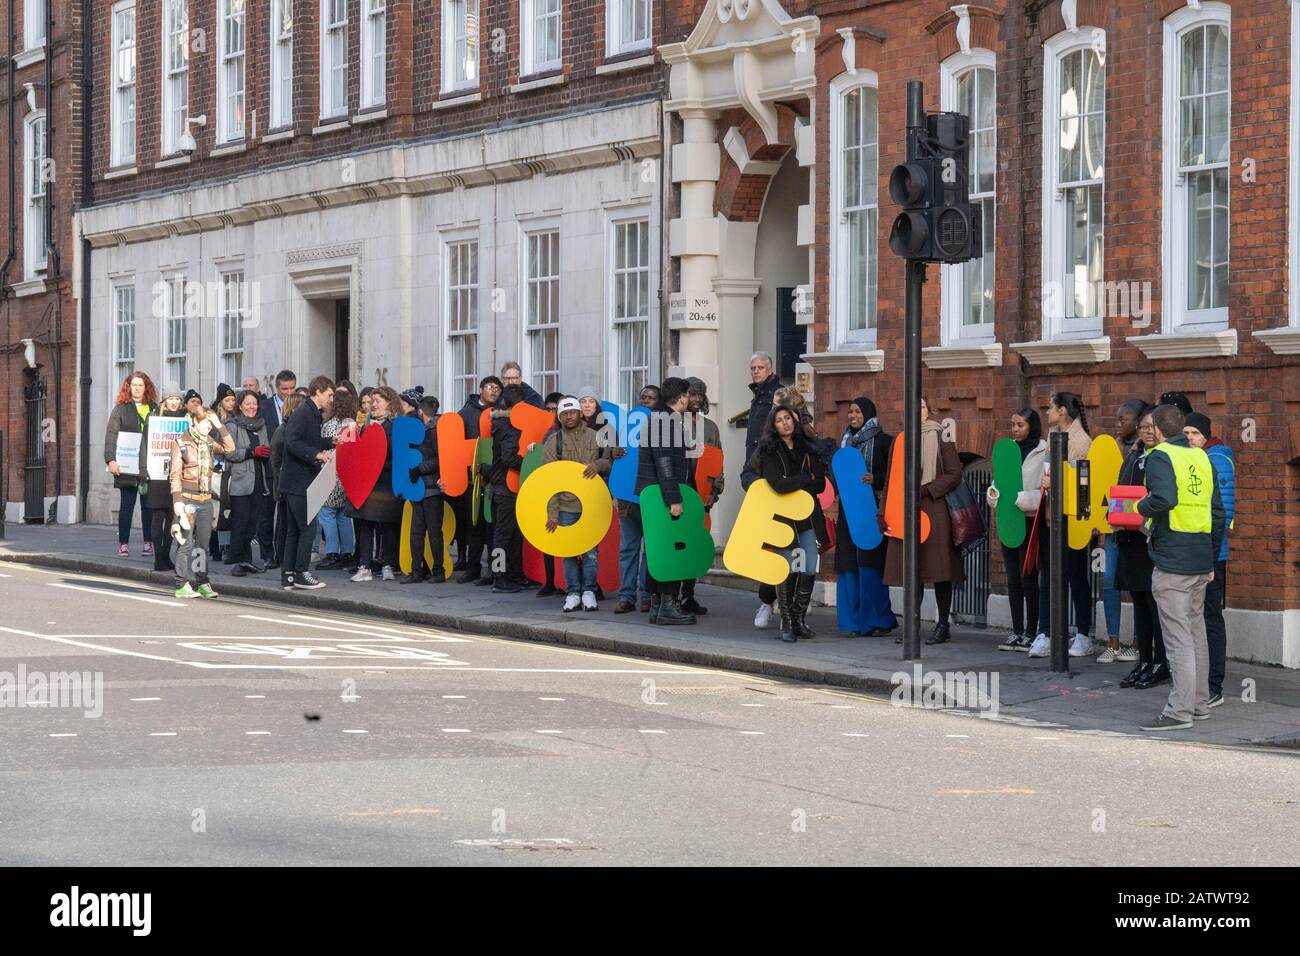 London, UK. 5th Feb, 2020. Amnesty International holds a demonstration outside Westminster to protest the Government's 'destructive' refugee reunion laws. The demonstration, which includes school children, activists and refugees, features a banner with multi-coloured lettering saying 'families belong together', and is followed up by activists handing in a 70,000-strong petition to the Home Office. Credit: Ian Davidson/Alamy Live News Stock Photo